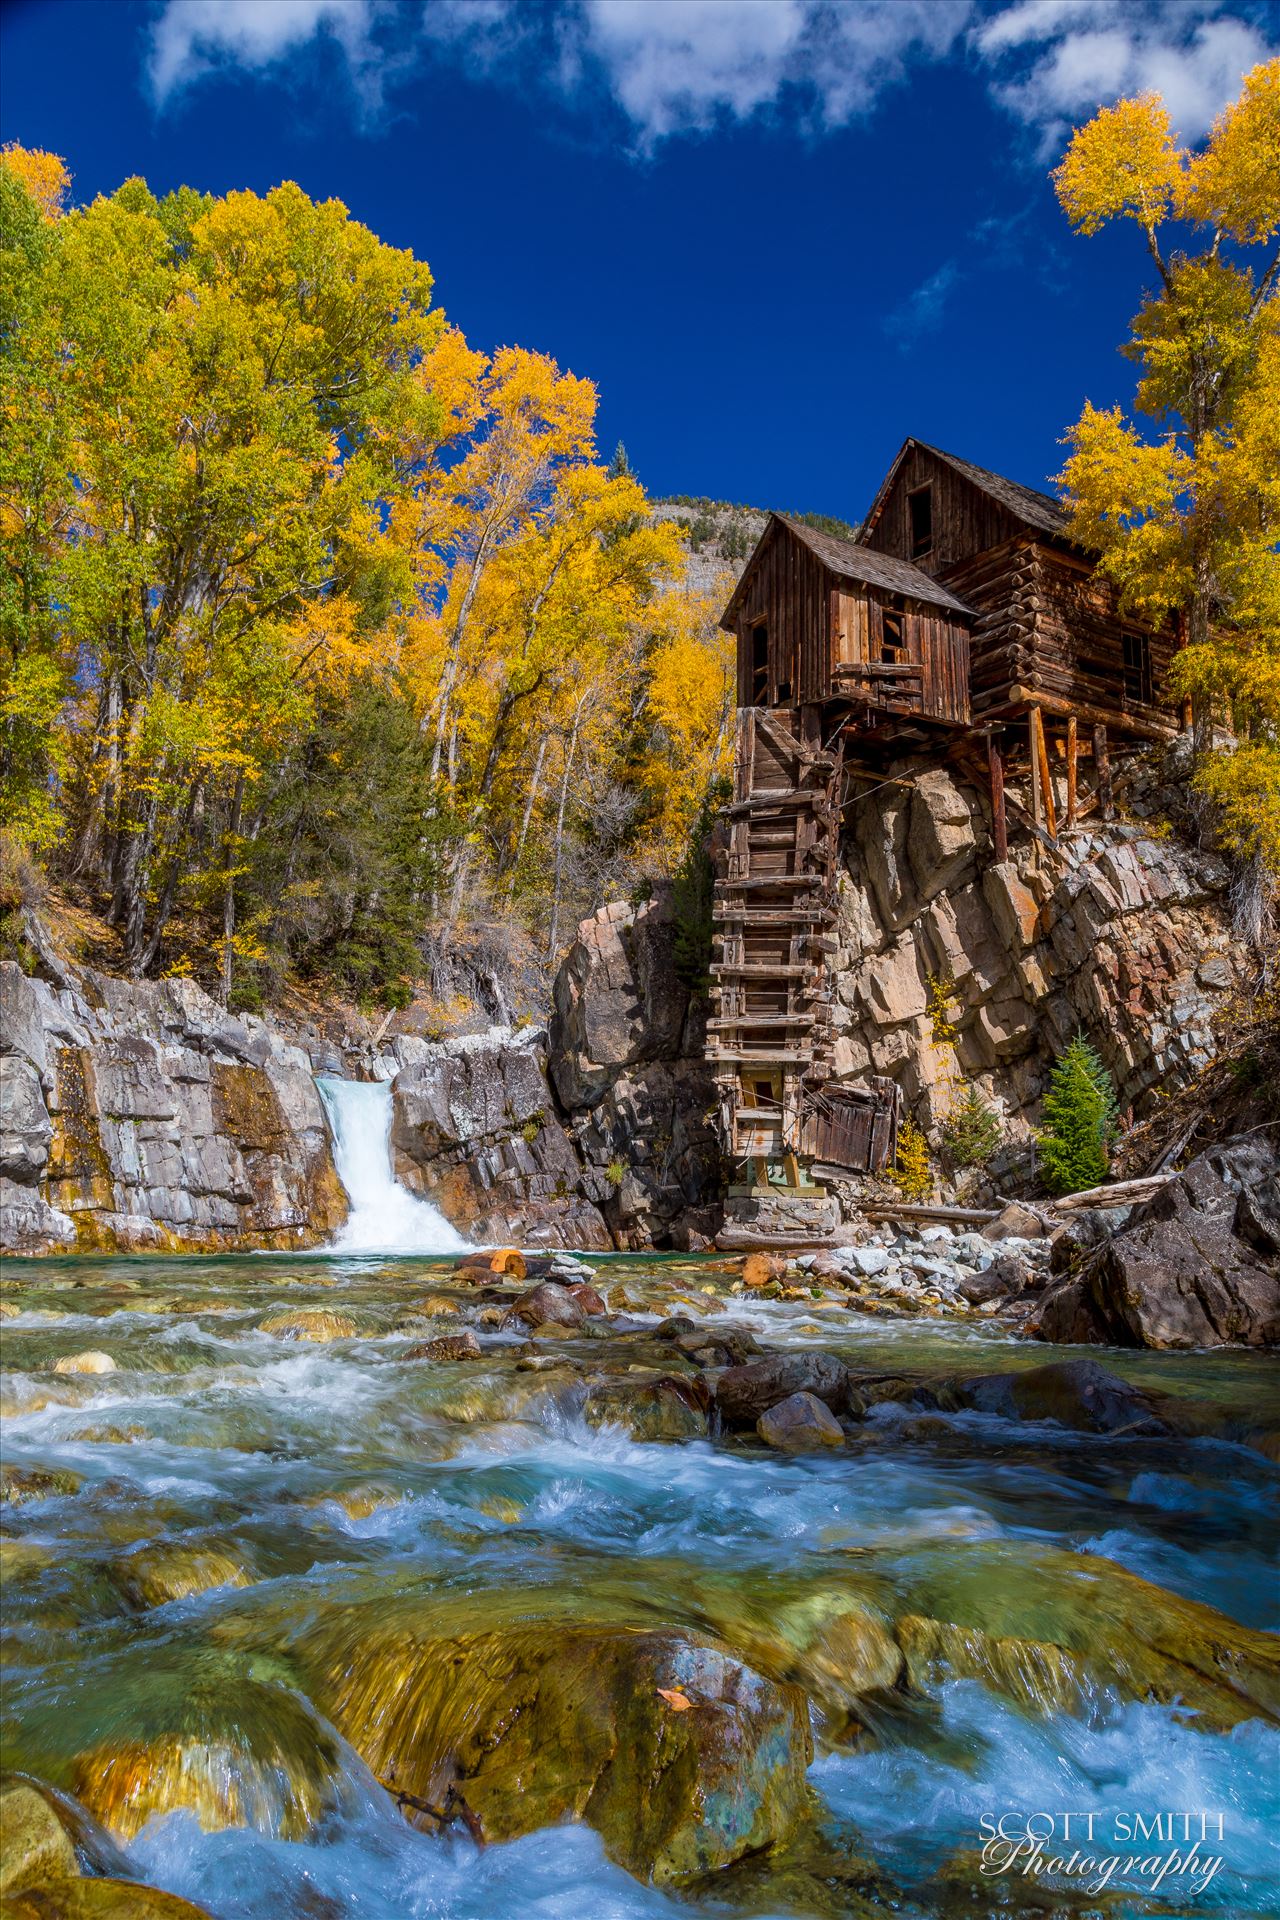 Crystal Mill, Colorado 04 The Crystal Mill, or the Old Mill is an 1892 wooden powerhouse located on an outcrop above the Crystal River in Crystal, Colorado by Scott Smith Photos